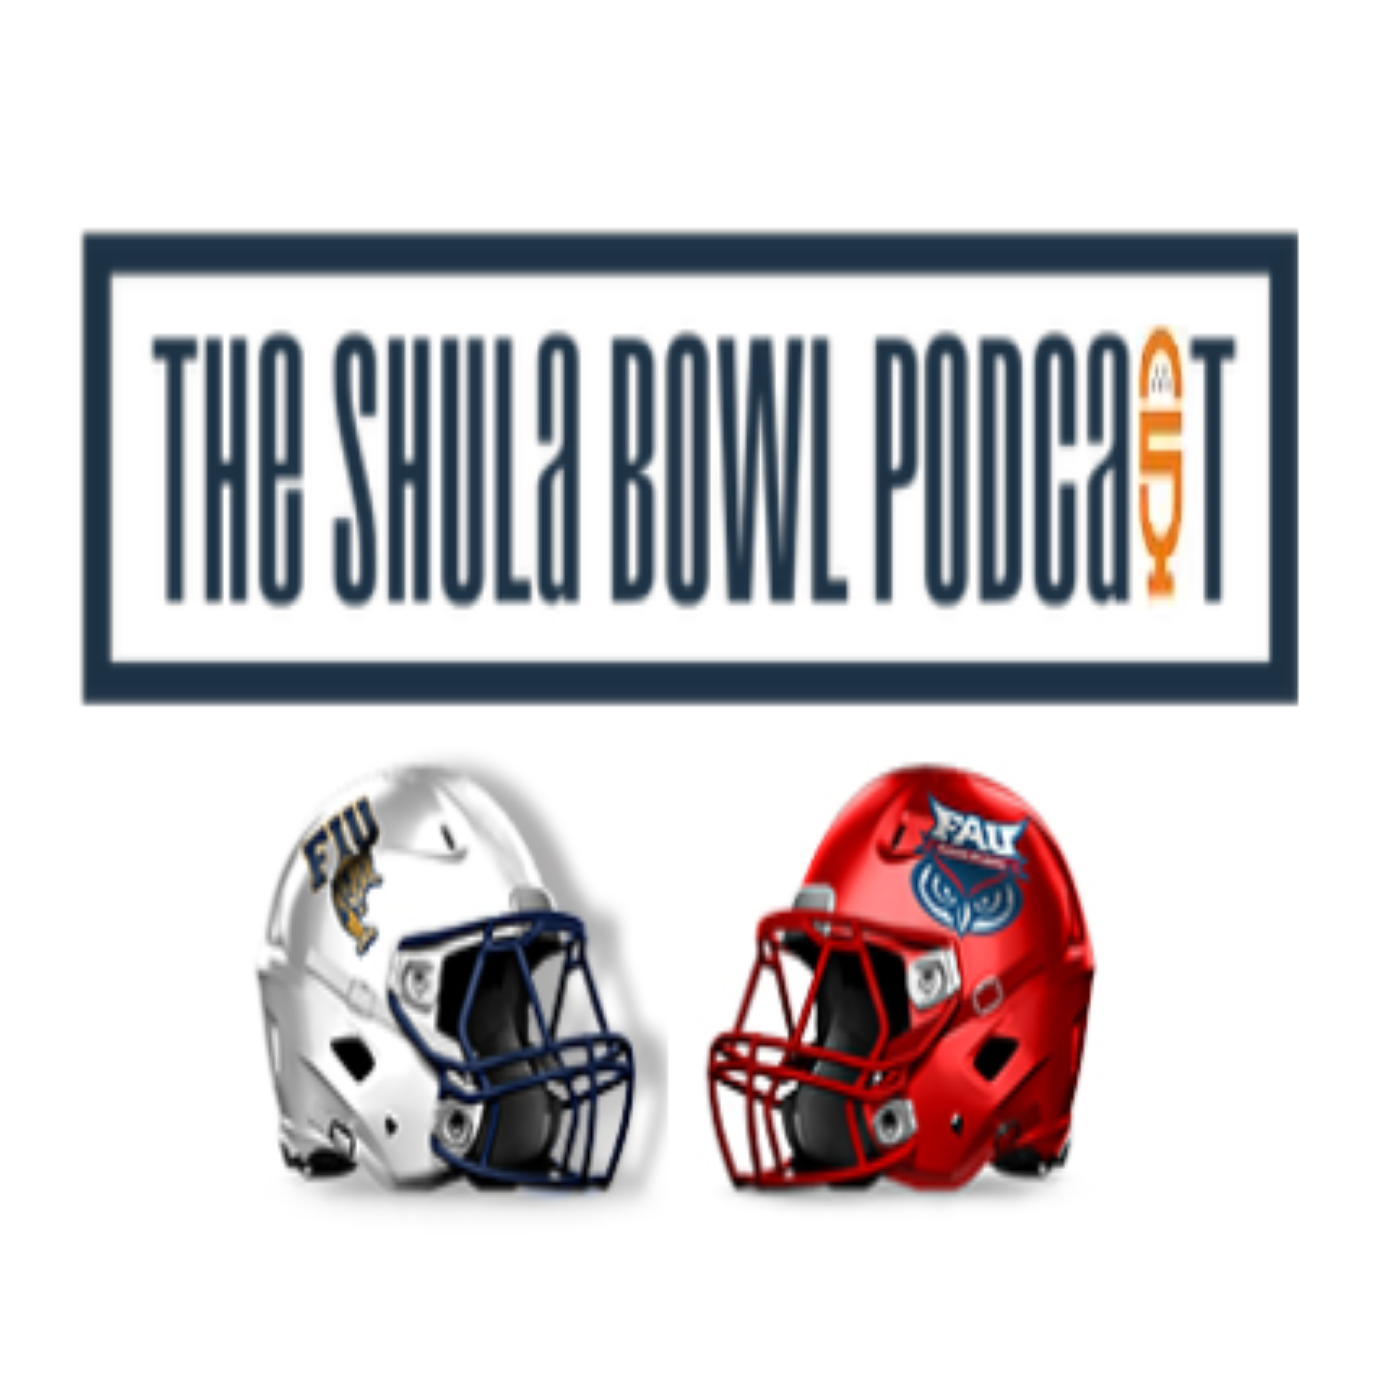 The Shula Bowl Podcast